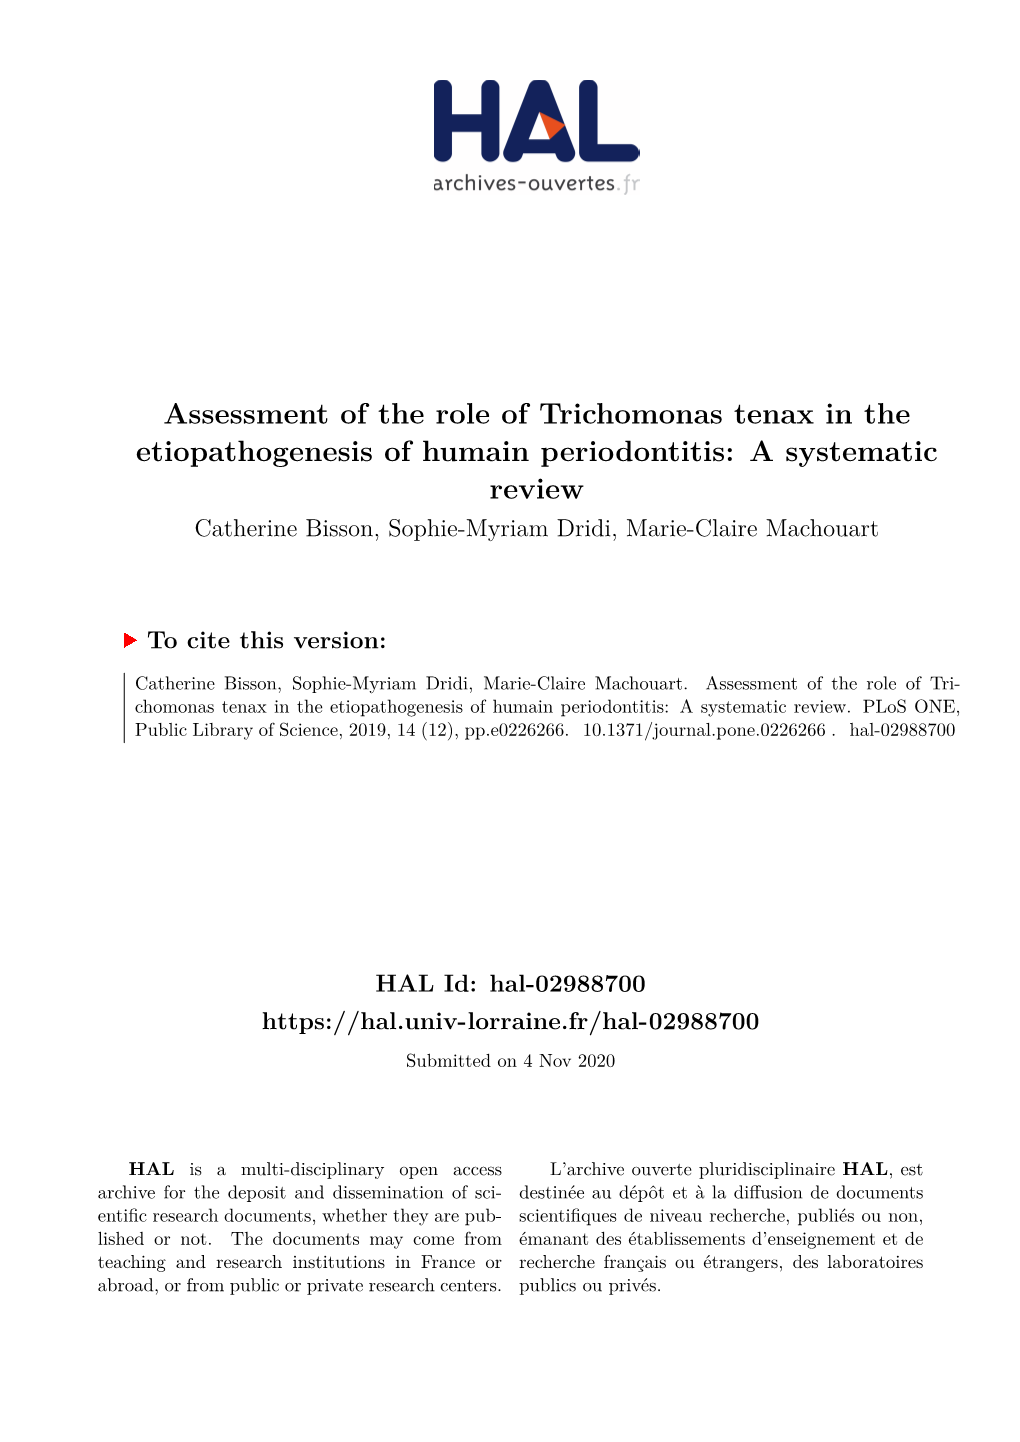 Trichomonas Tenax in the Etiopathogenesis of Humain Periodontitis: a Systematic Review Catherine Bisson, Sophie-Myriam Dridi, Marie-Claire Machouart